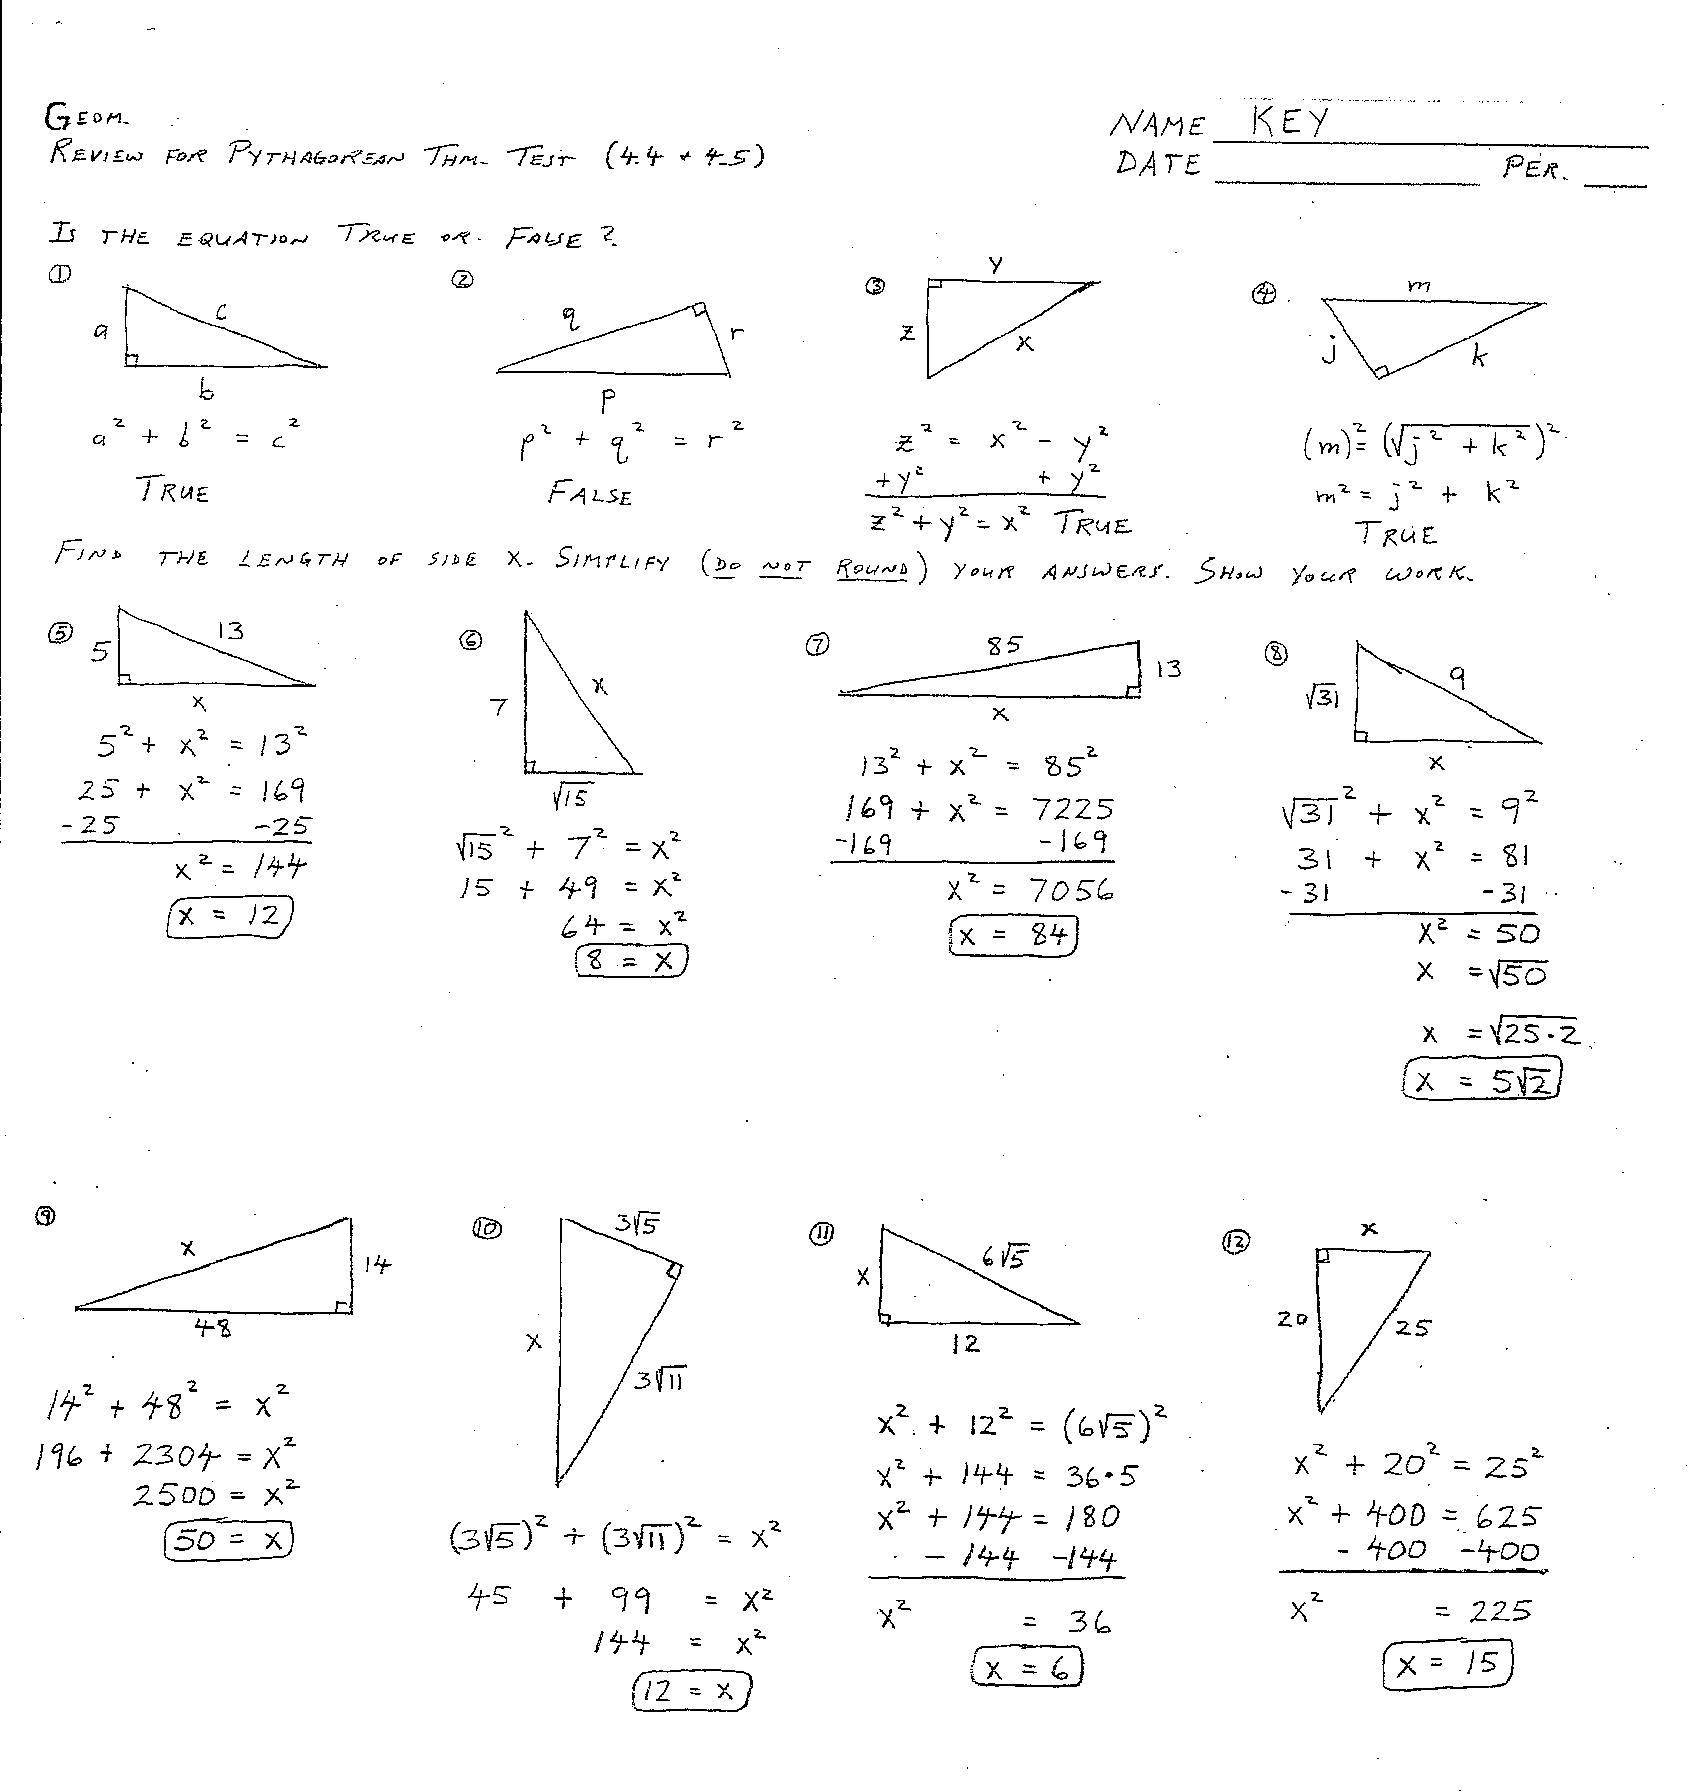 isosceles-triangle-proofs-worksheet-with-answers